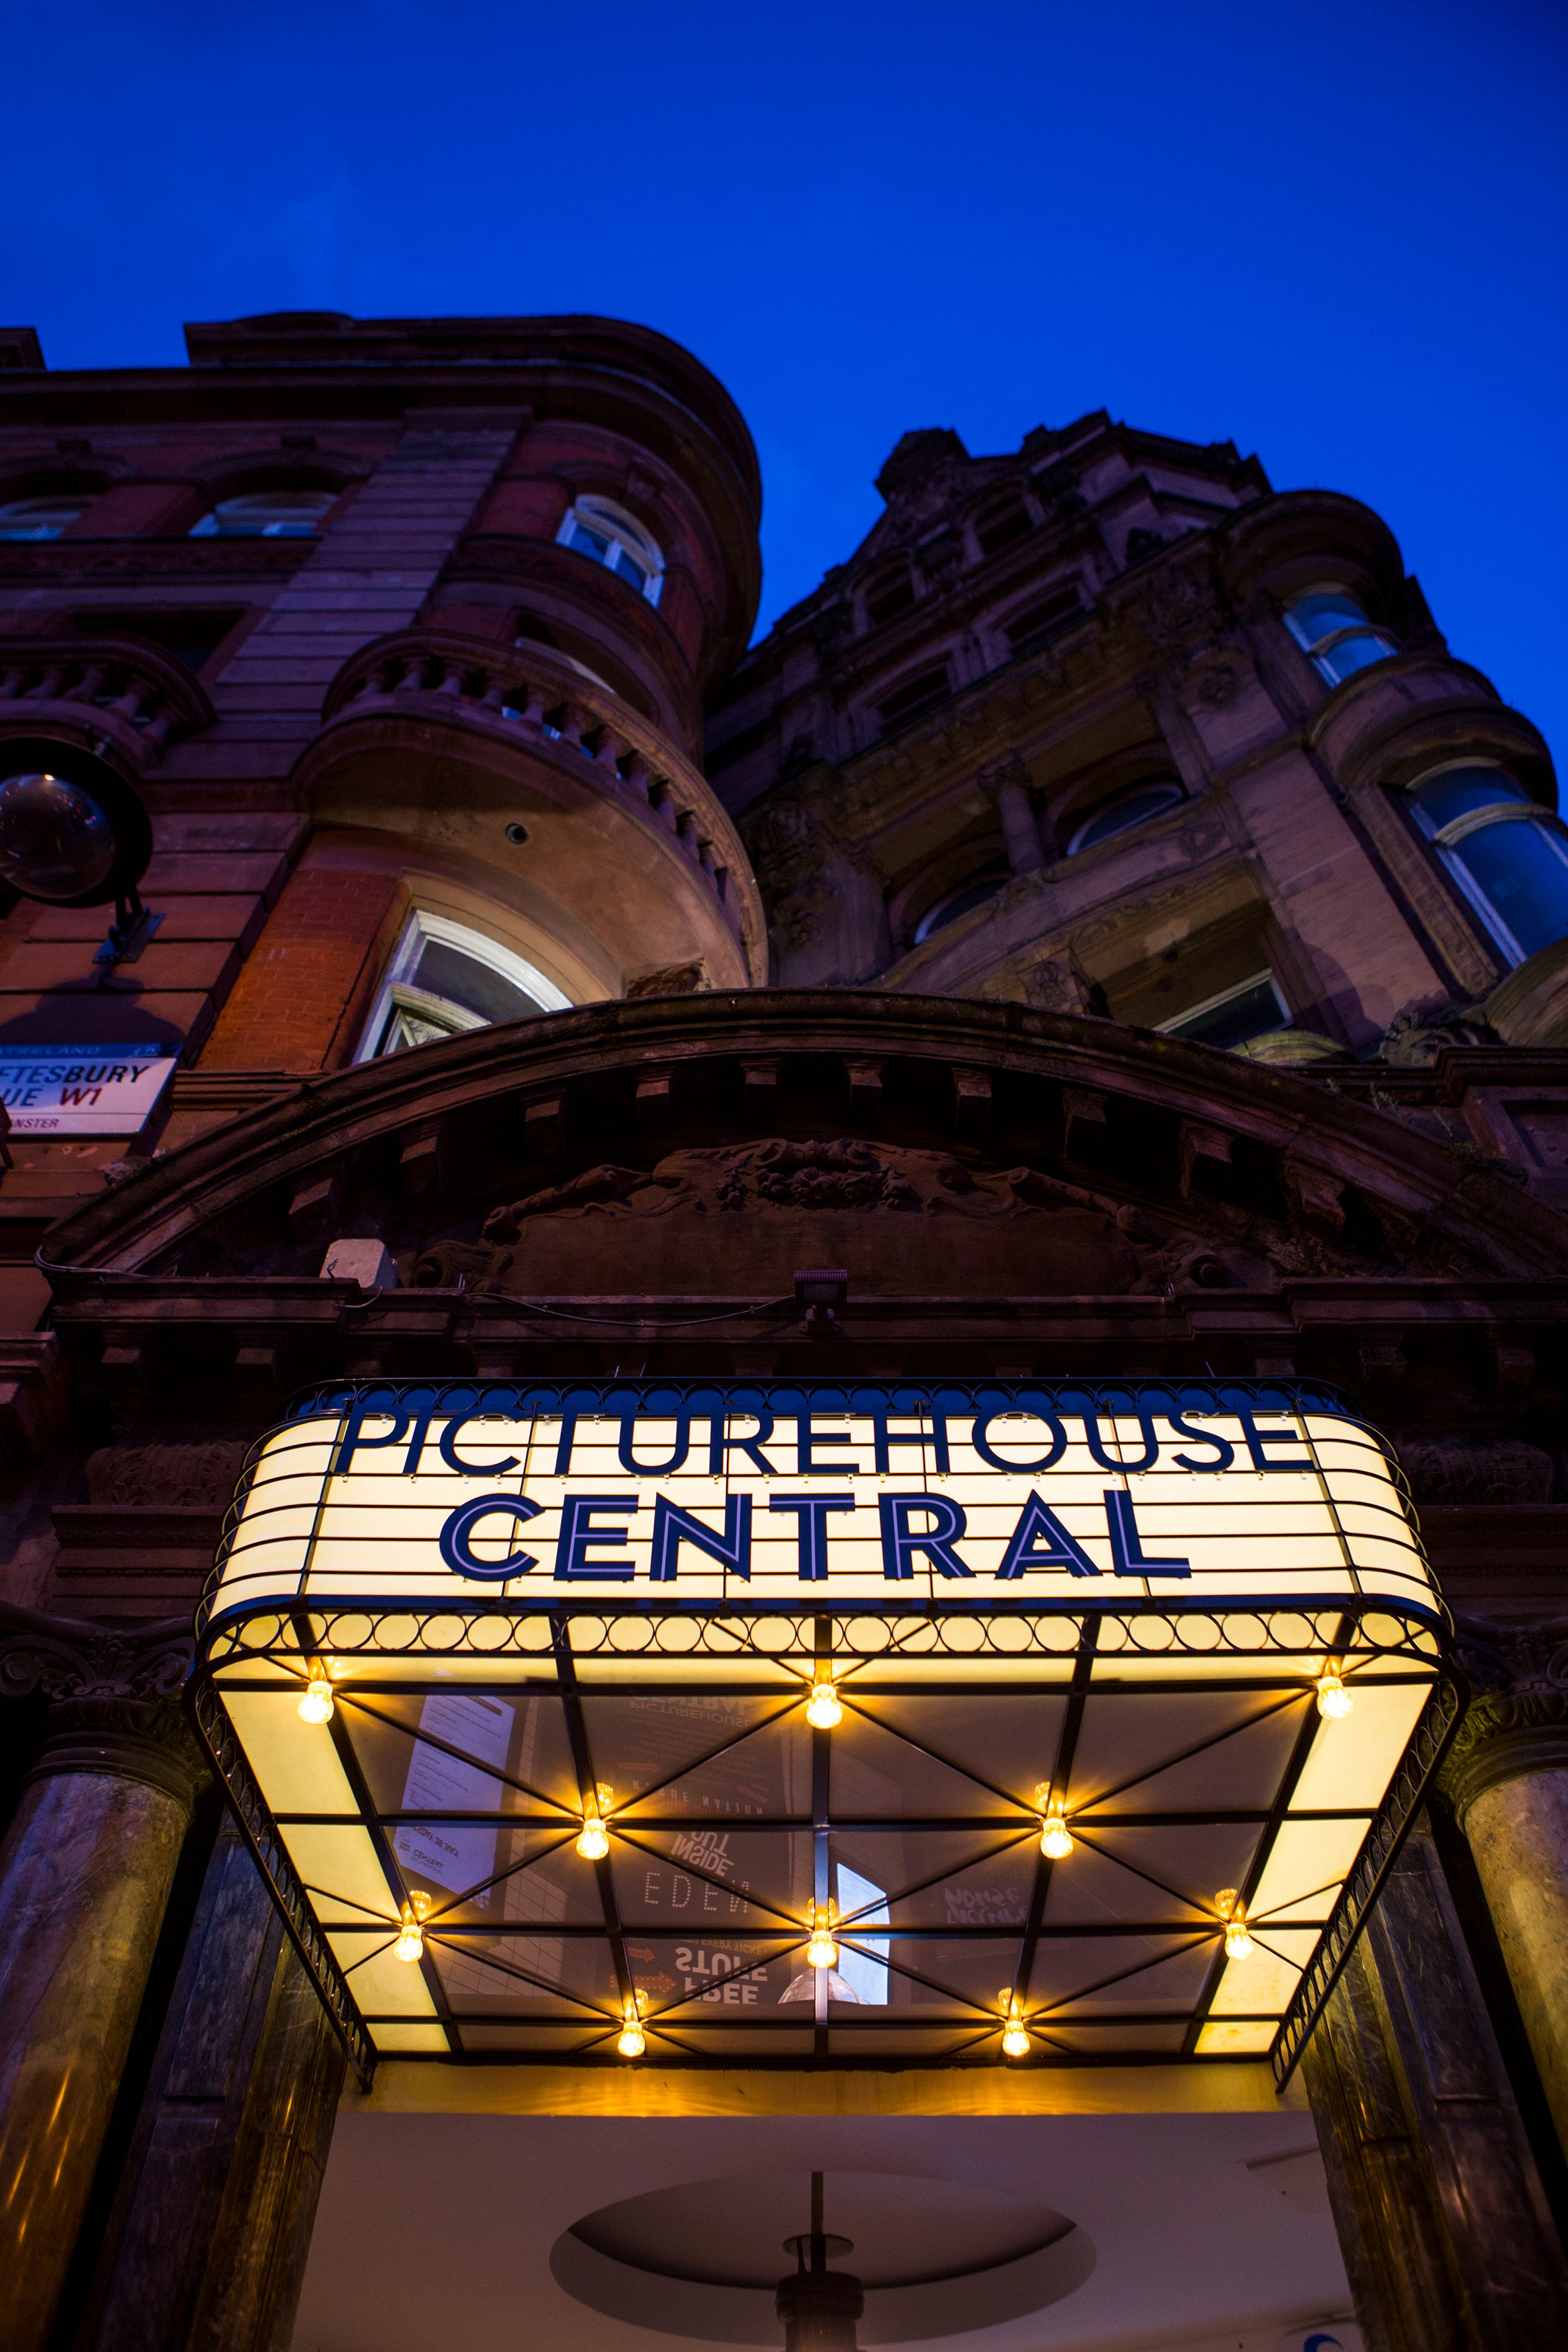 Picturehouse Cinema Signs